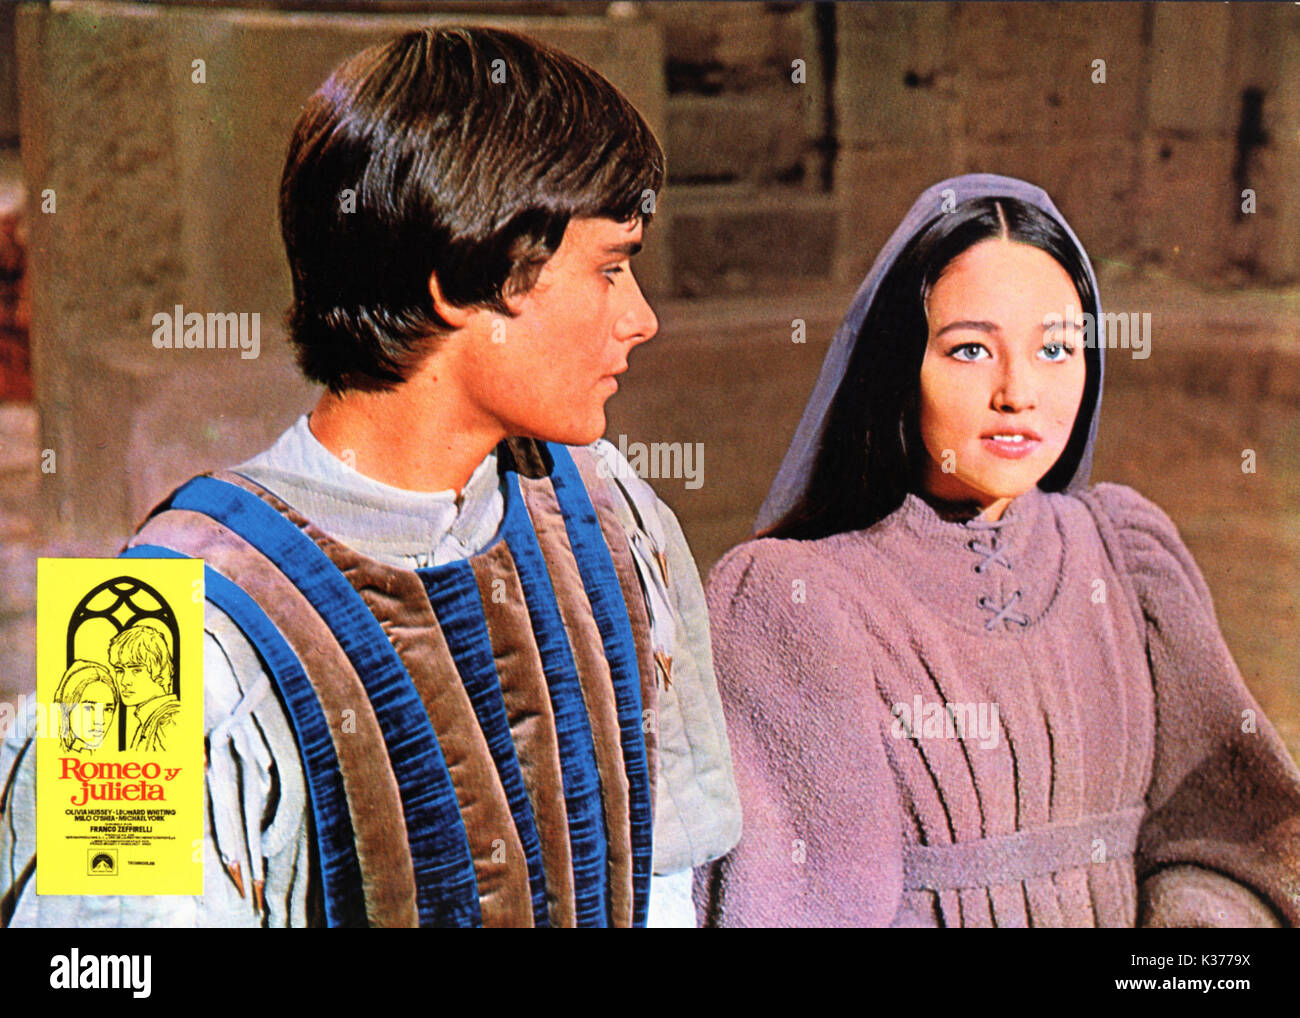 ROMEO AND JULIET LEONARD WHITING AND OLIVIA HUSSEY A PARAMOUNT PICTURE     Date: 1968 Stock Photo